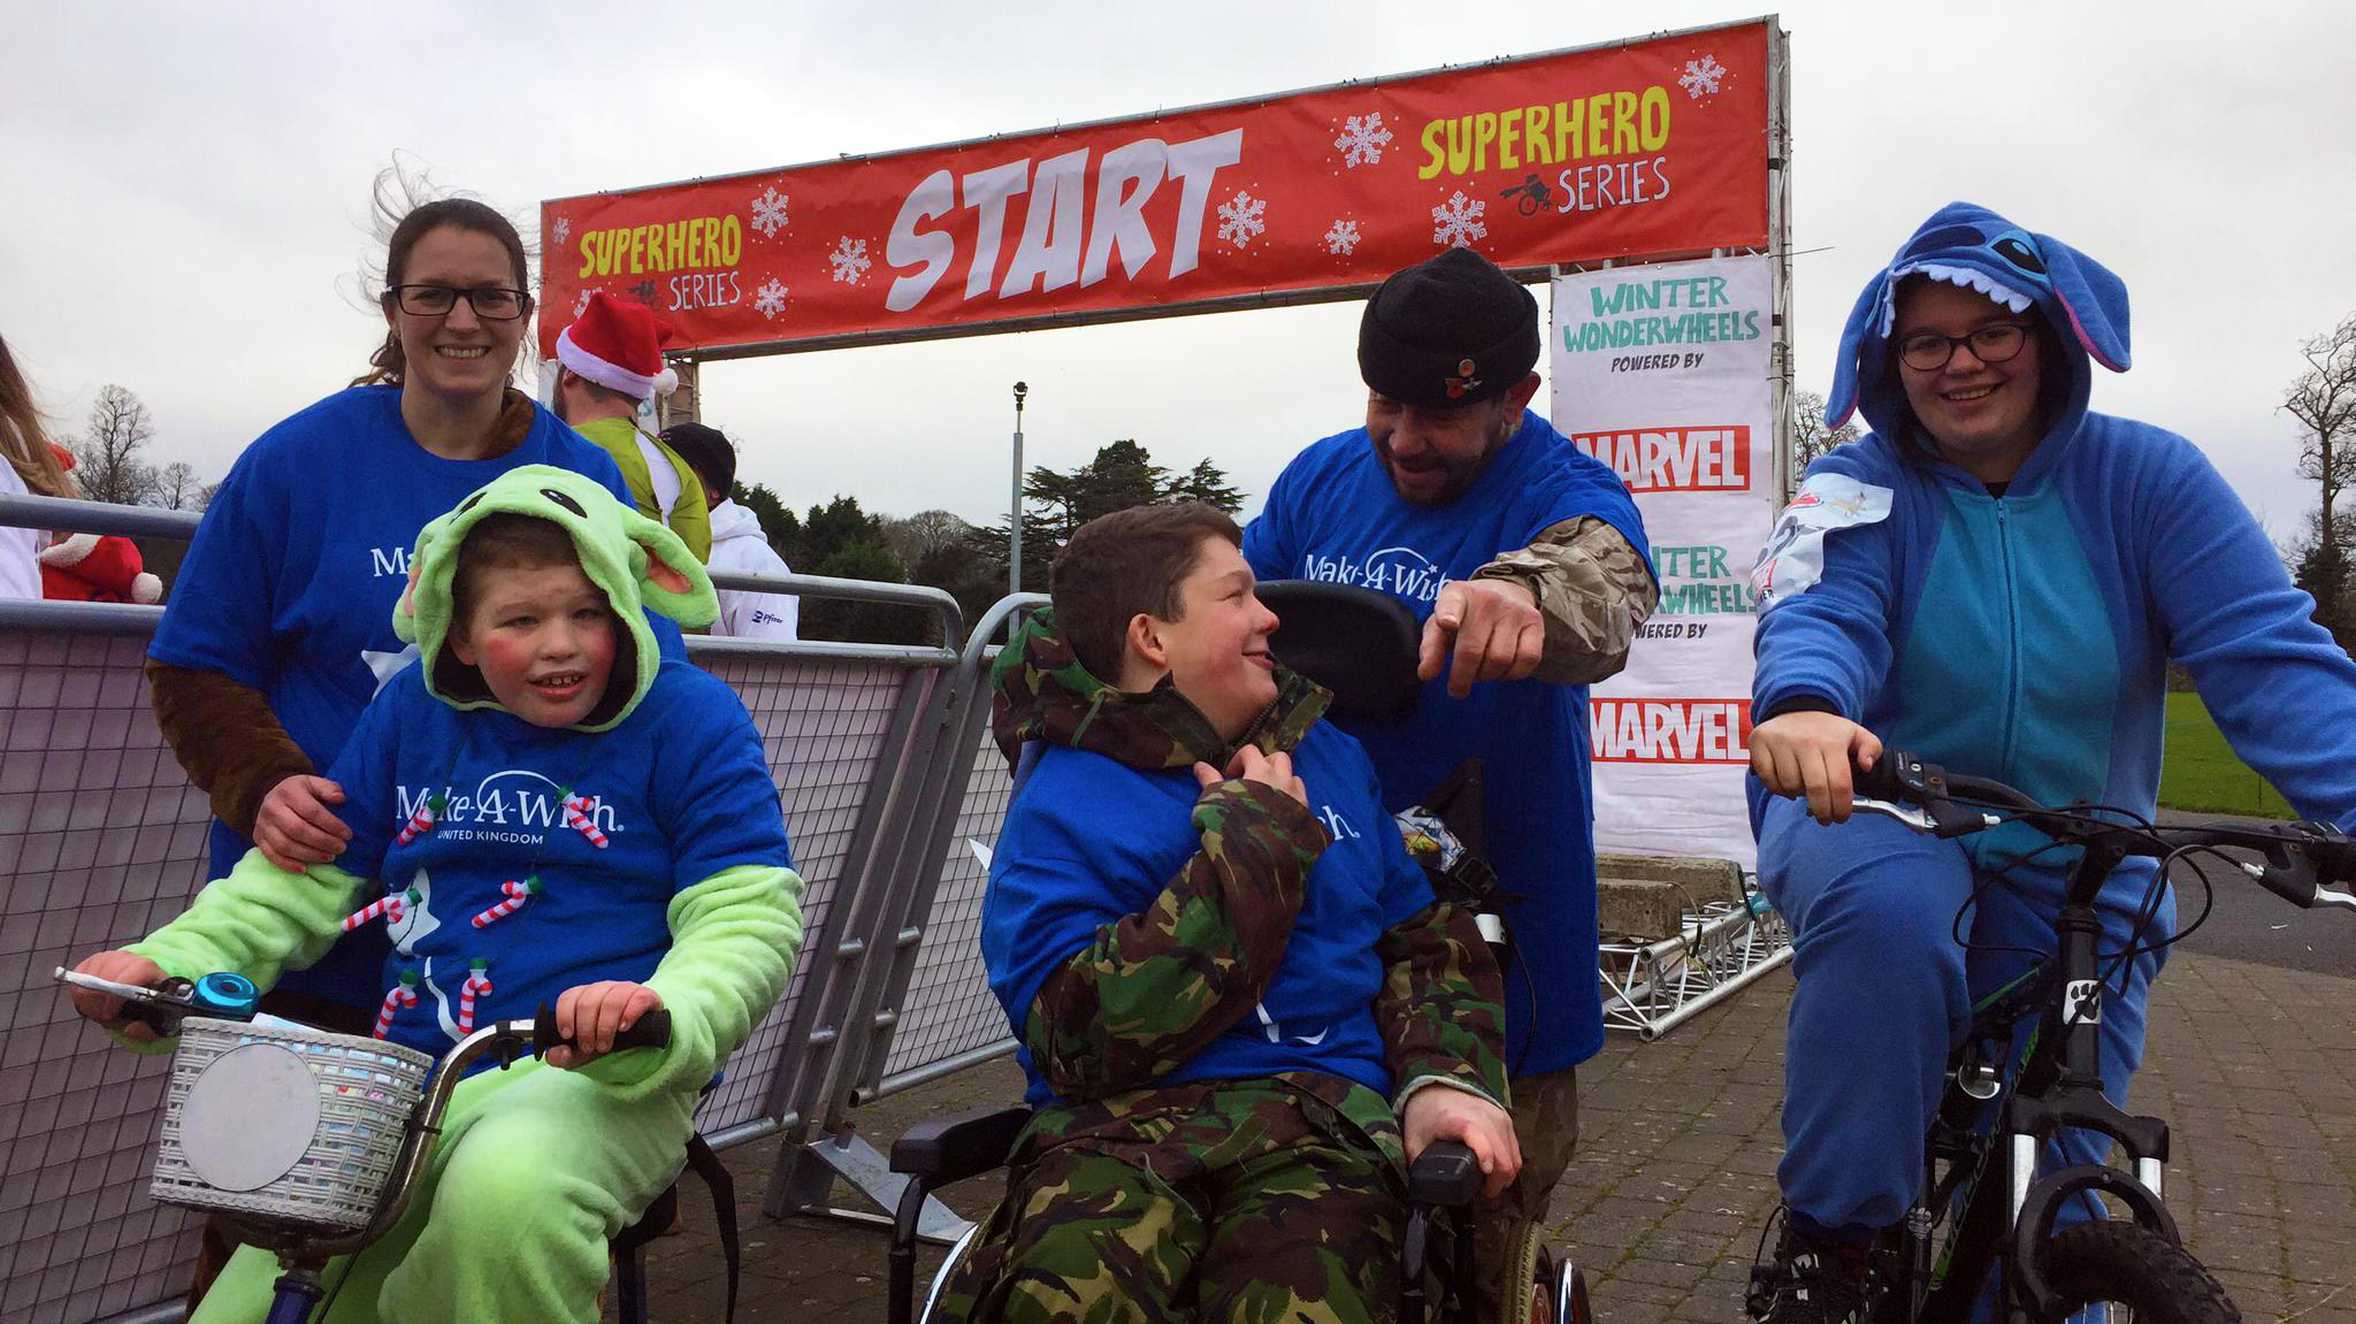 Wish child, Dylan and his family taking part in the 2021 Superhero Tri challenge event.